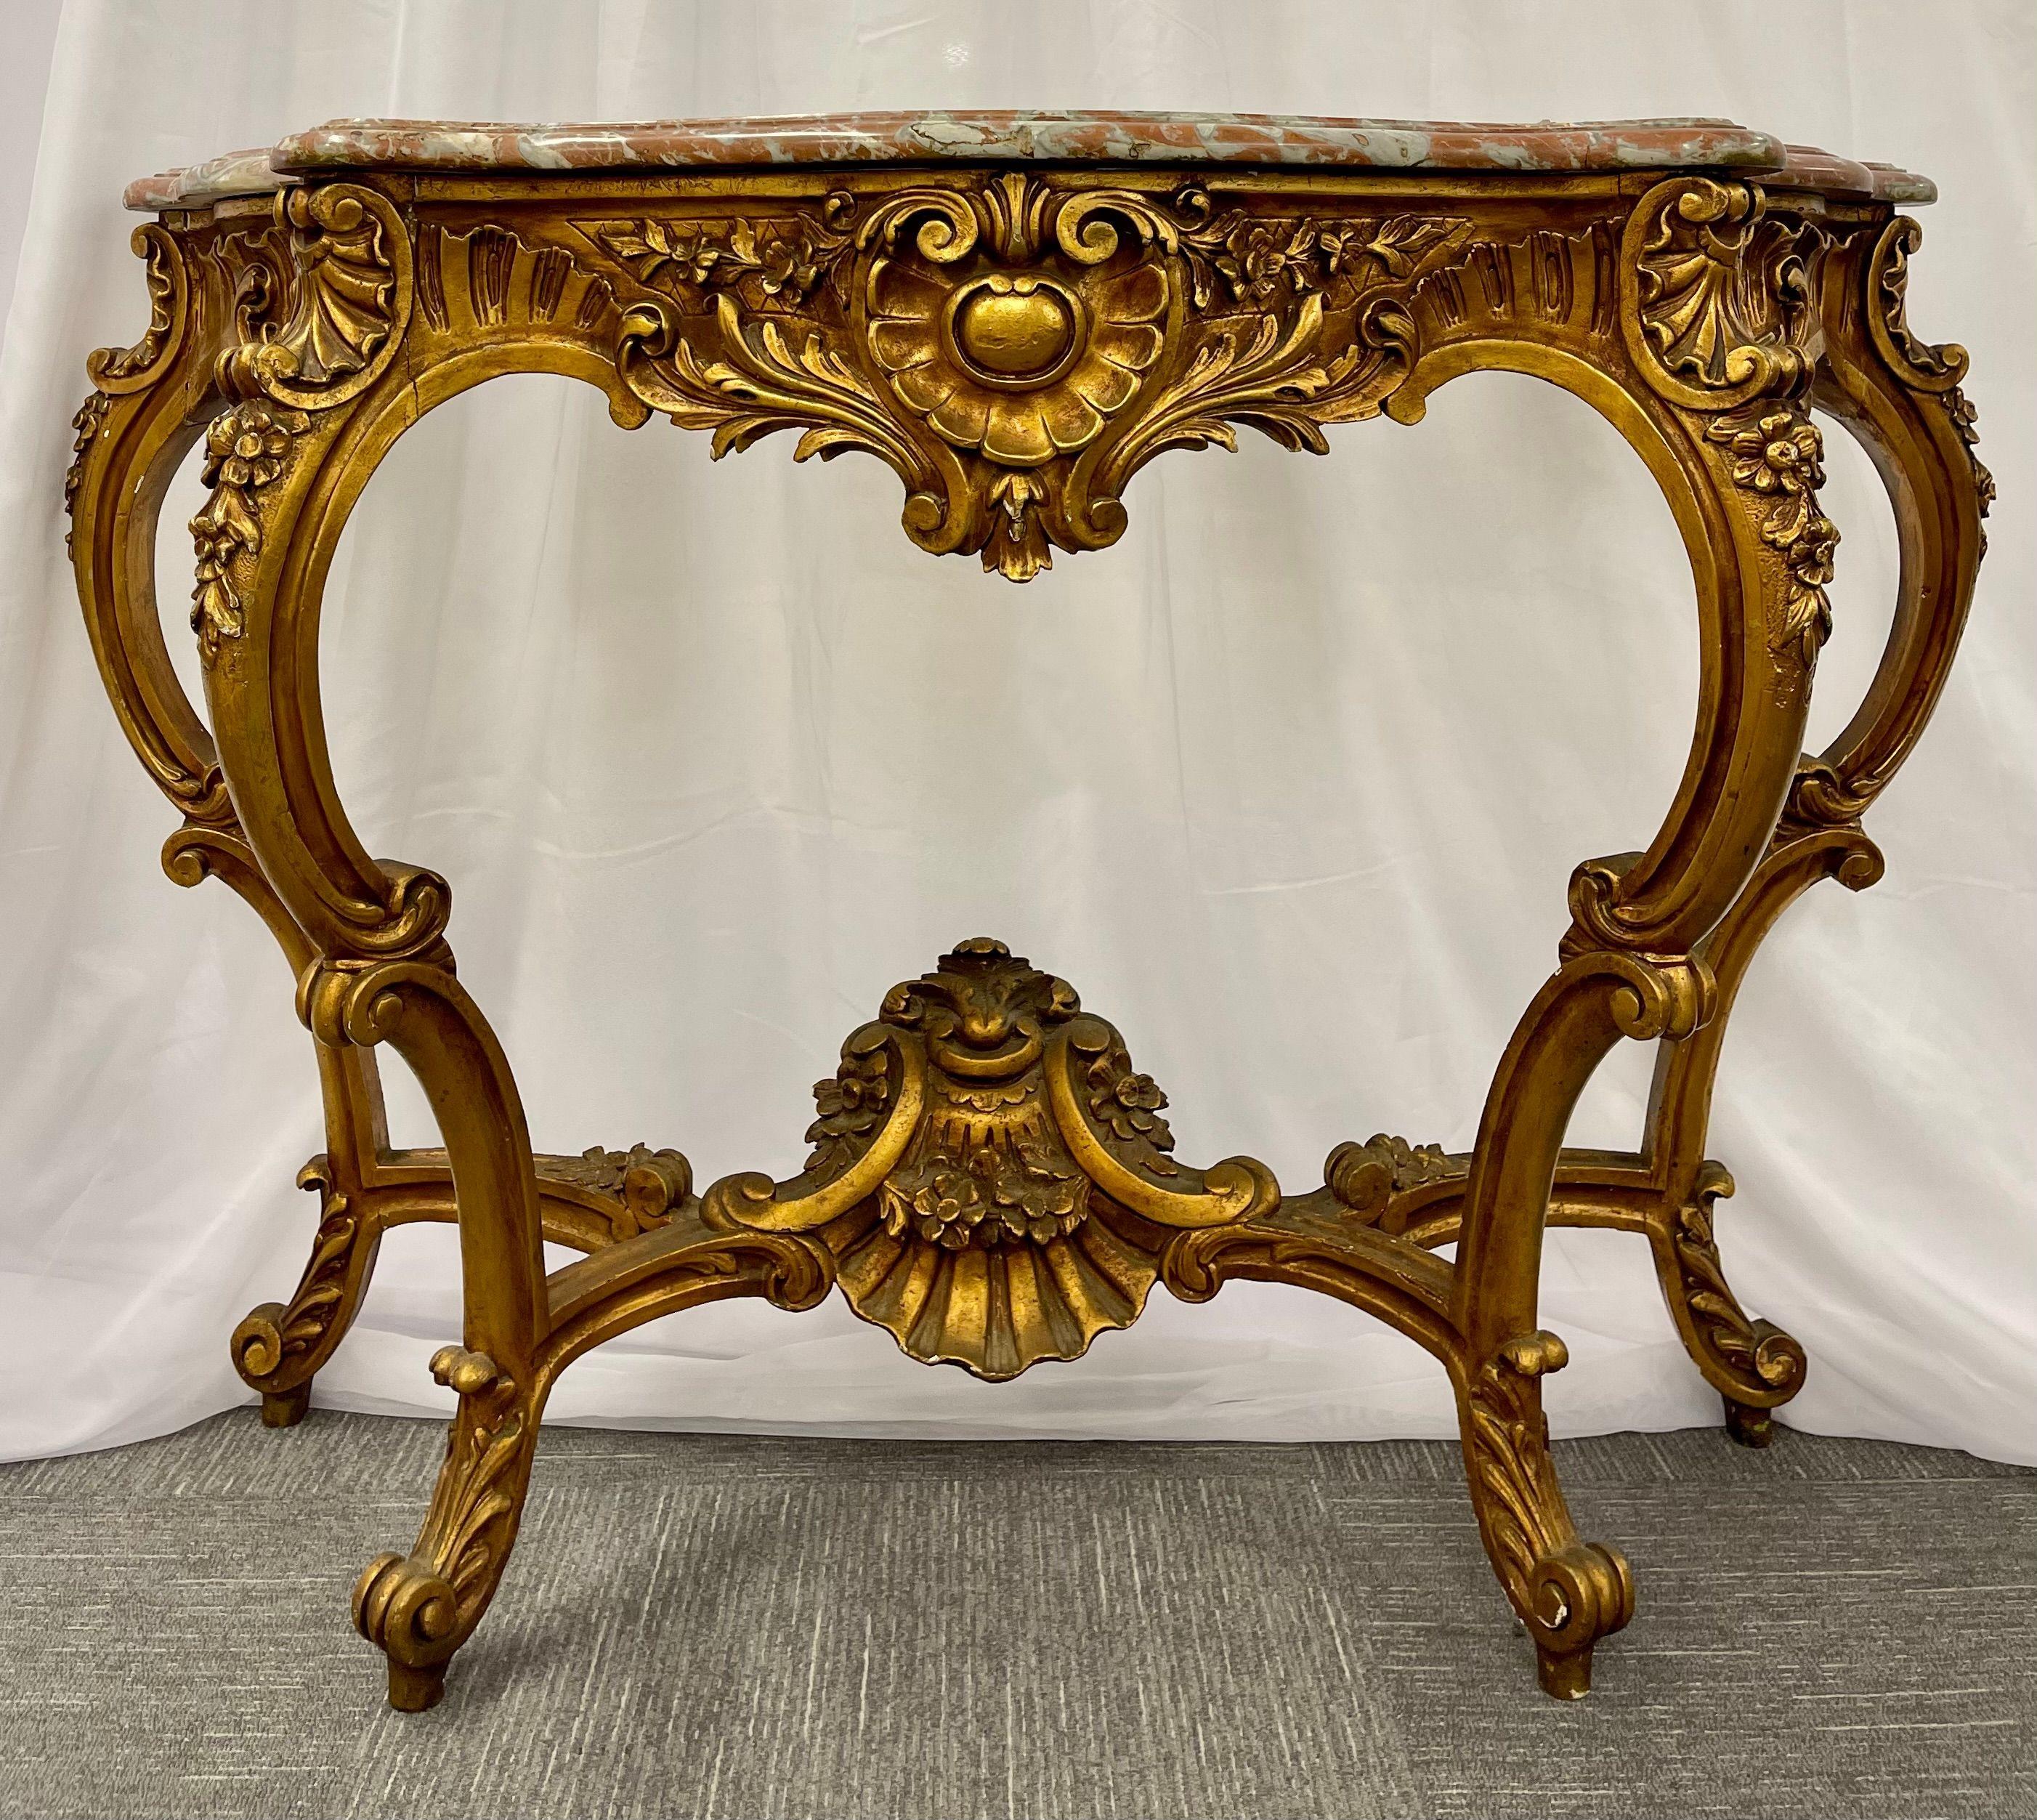 Wood Marble-Top Louis XV Style Console Table by Jansen Exquisite Carved Details 1920s For Sale